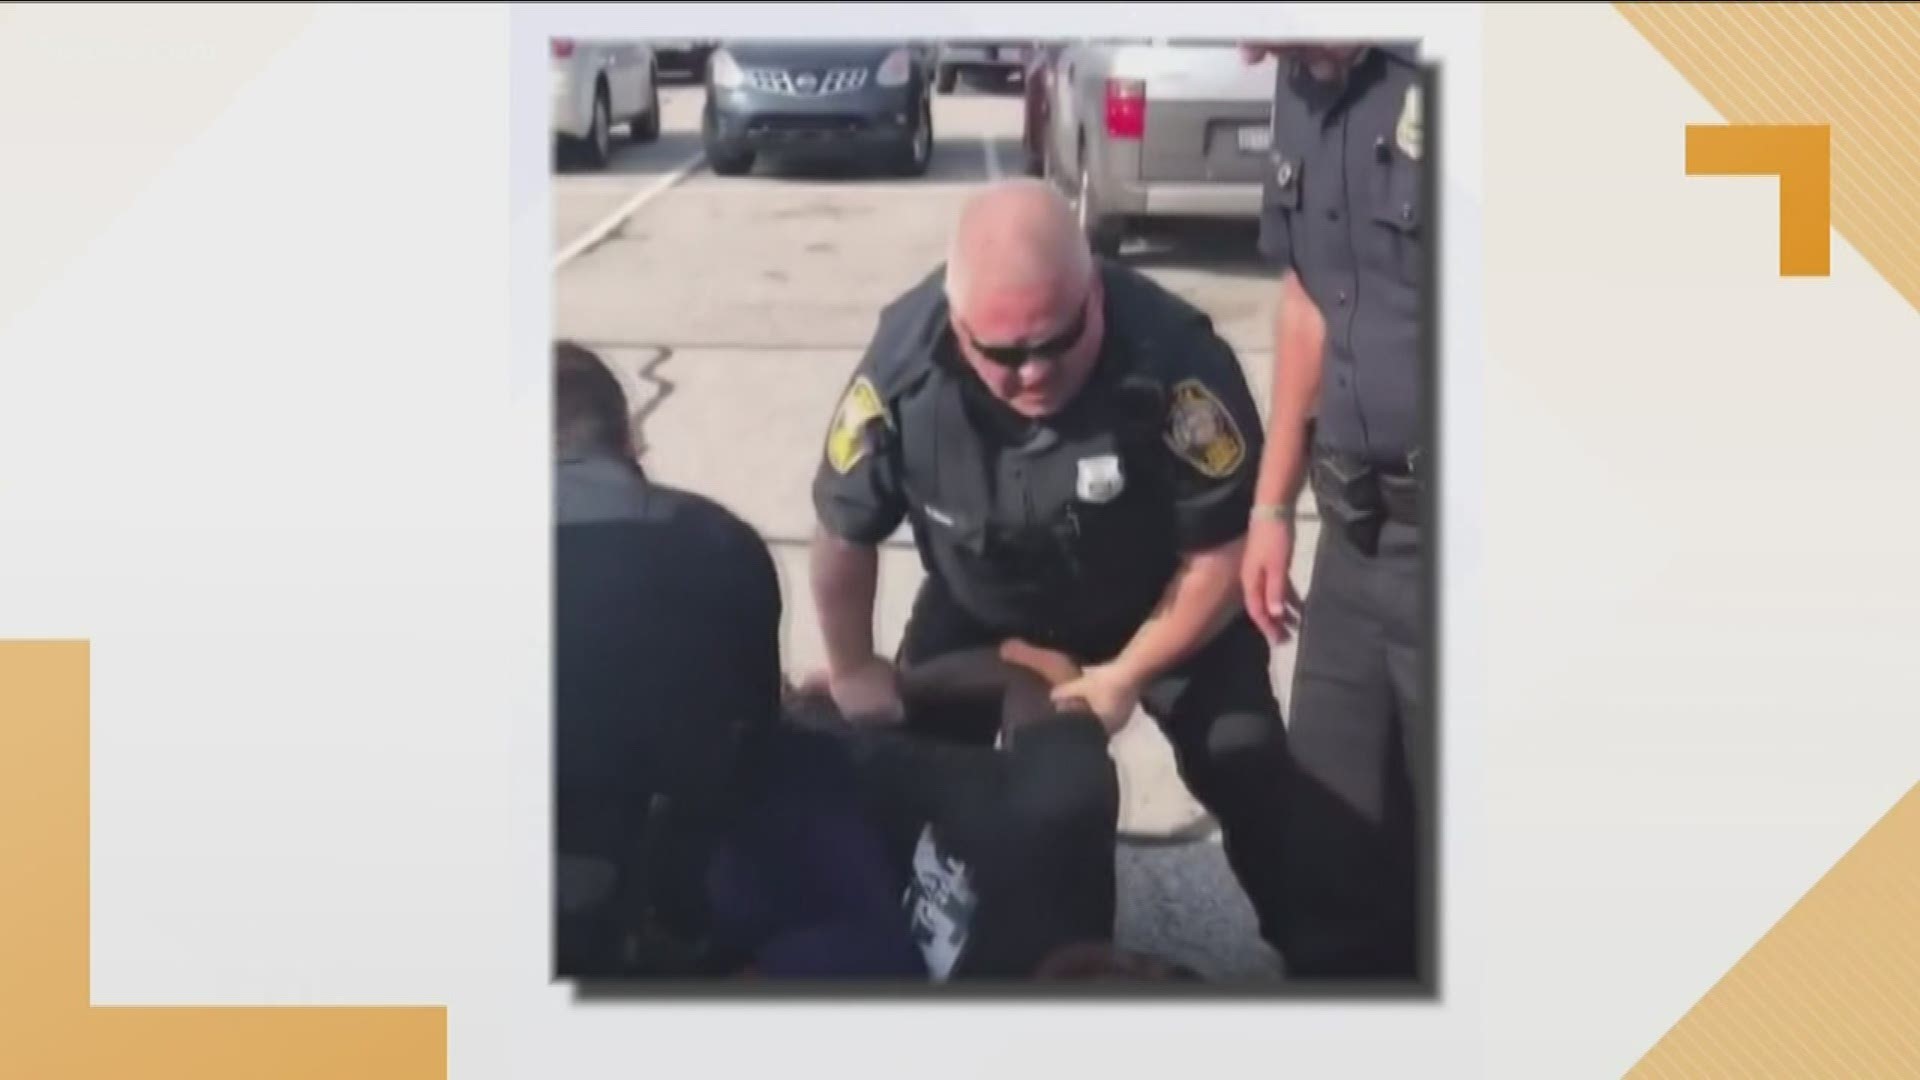 During a 2017 traffic stop, video captures David Rose was seen choking former NFL player Desmond Marrow while Marrow was on the ground and handcuffed from behind.